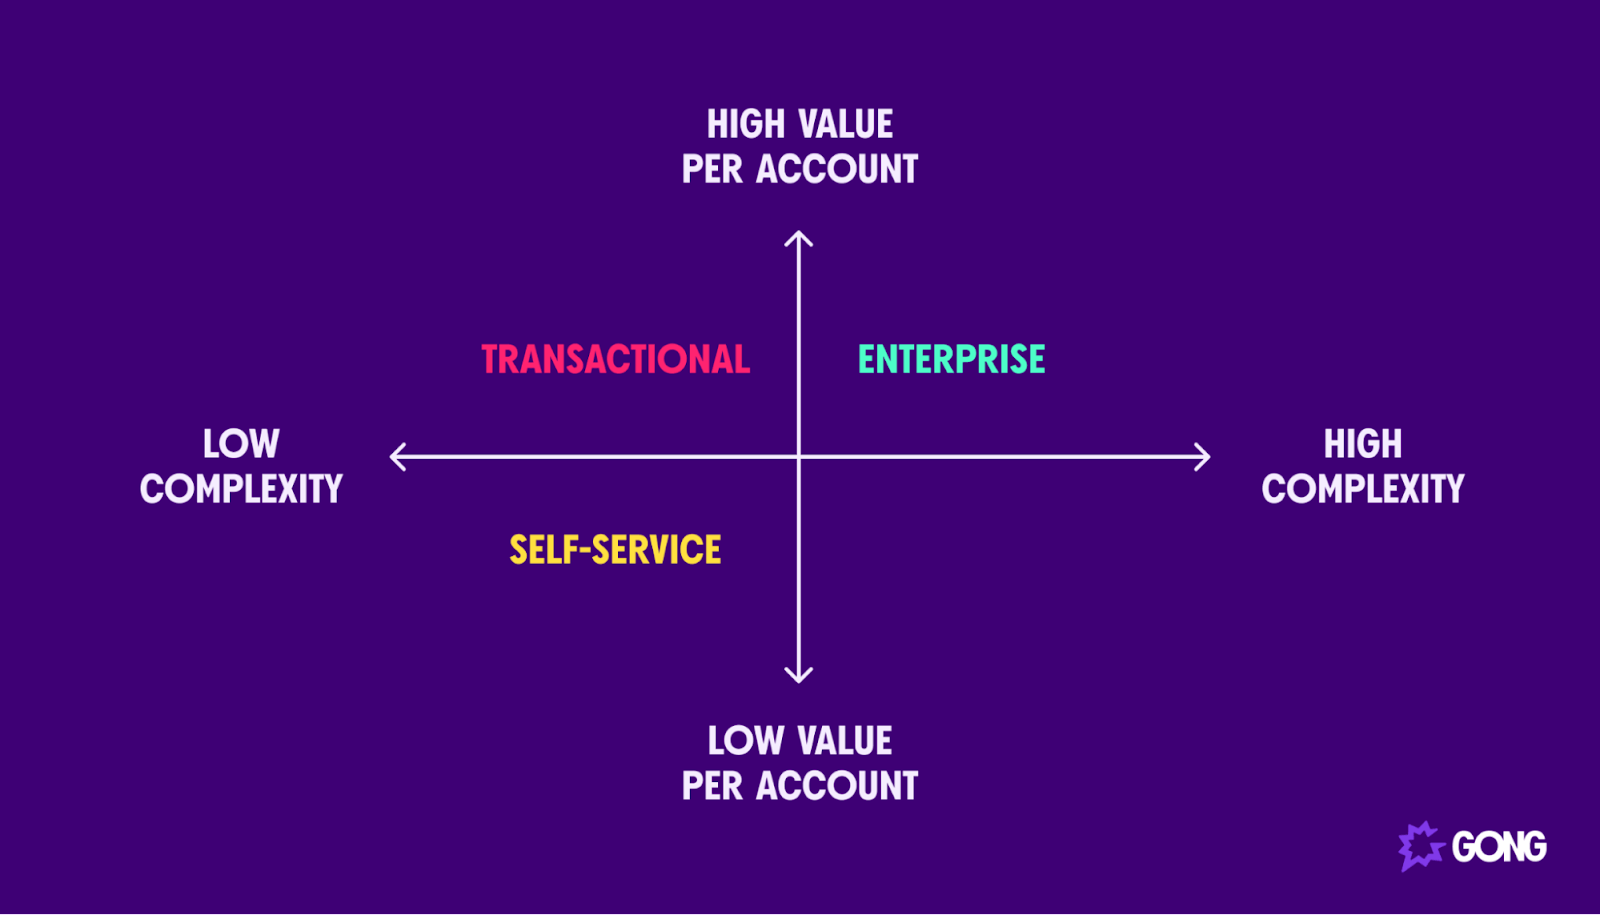 Enterprise Sales are higher value and more complex